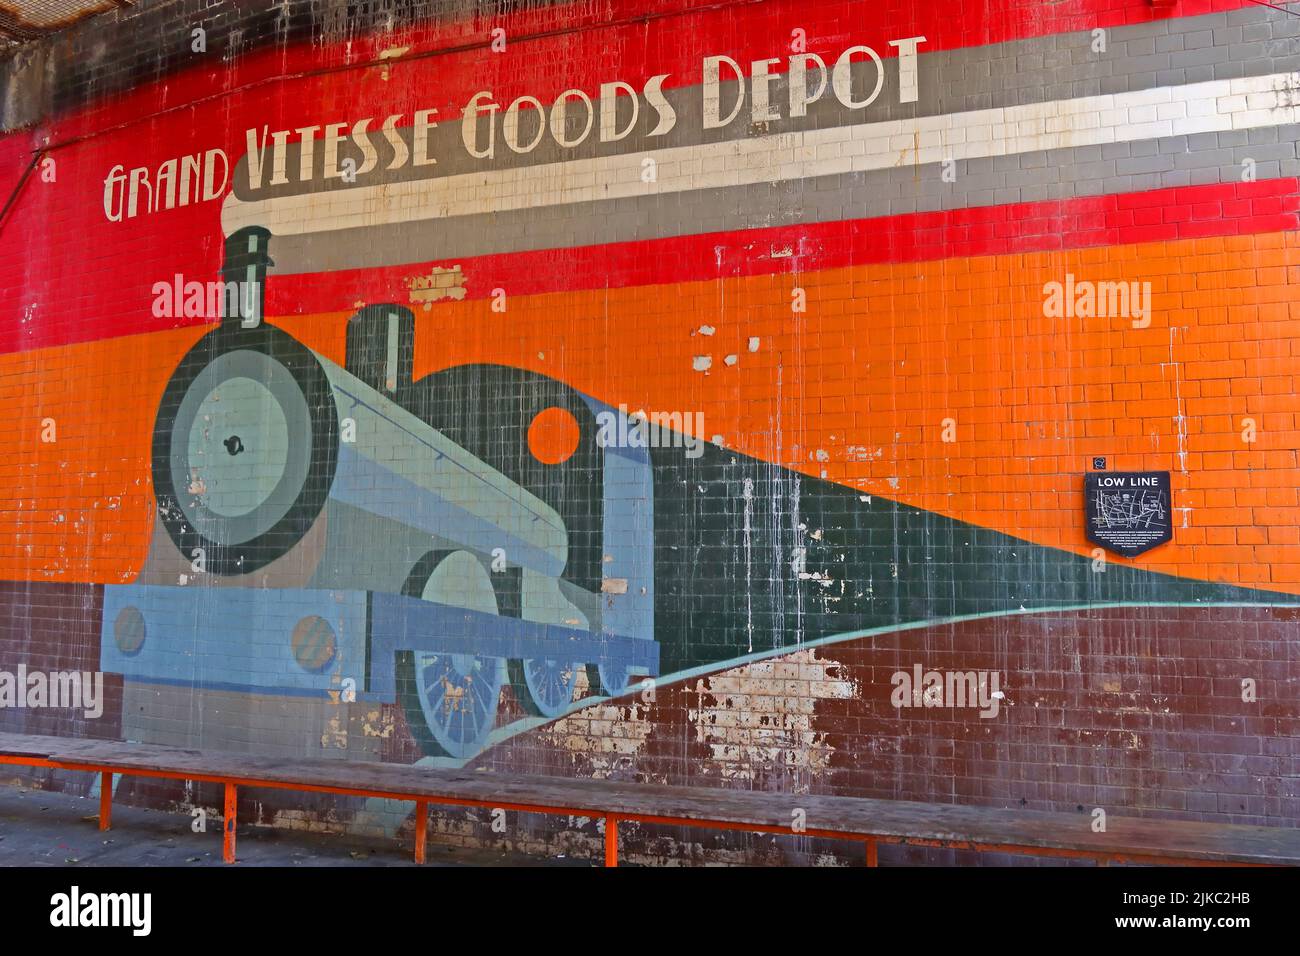 Art at the London Low Line - Grand Vitesse Goods Depot Painting in Great Suffolk St, Southwark, Londra, Inghilterra, Regno Unito, SE1 0UE Foto Stock